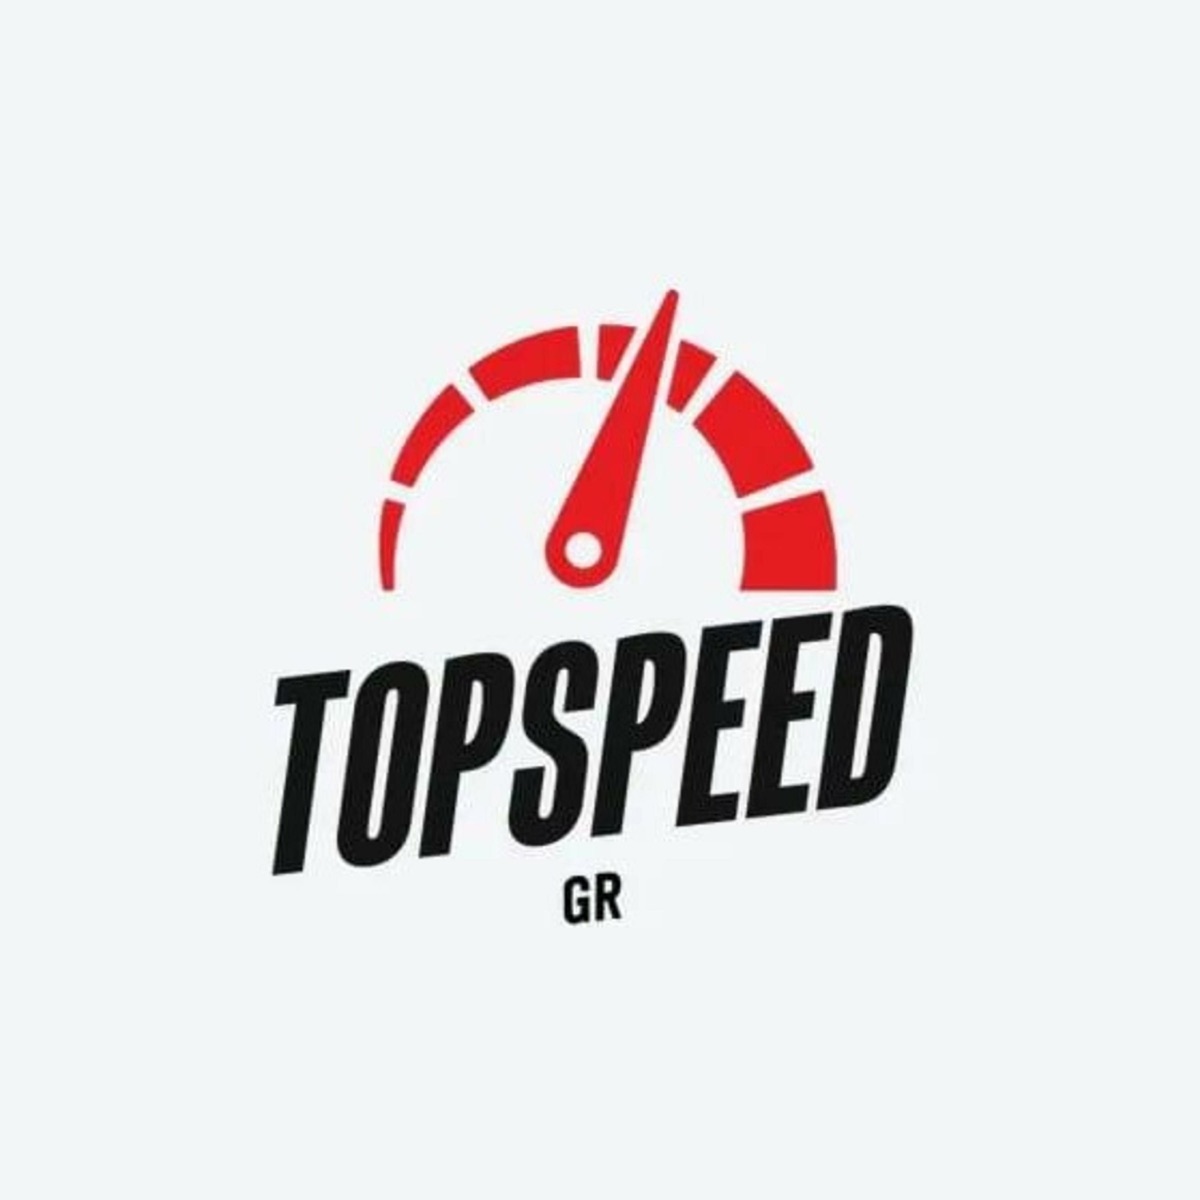 Car News Podcast by TopSpeed.Gr – Podcast – Podtail